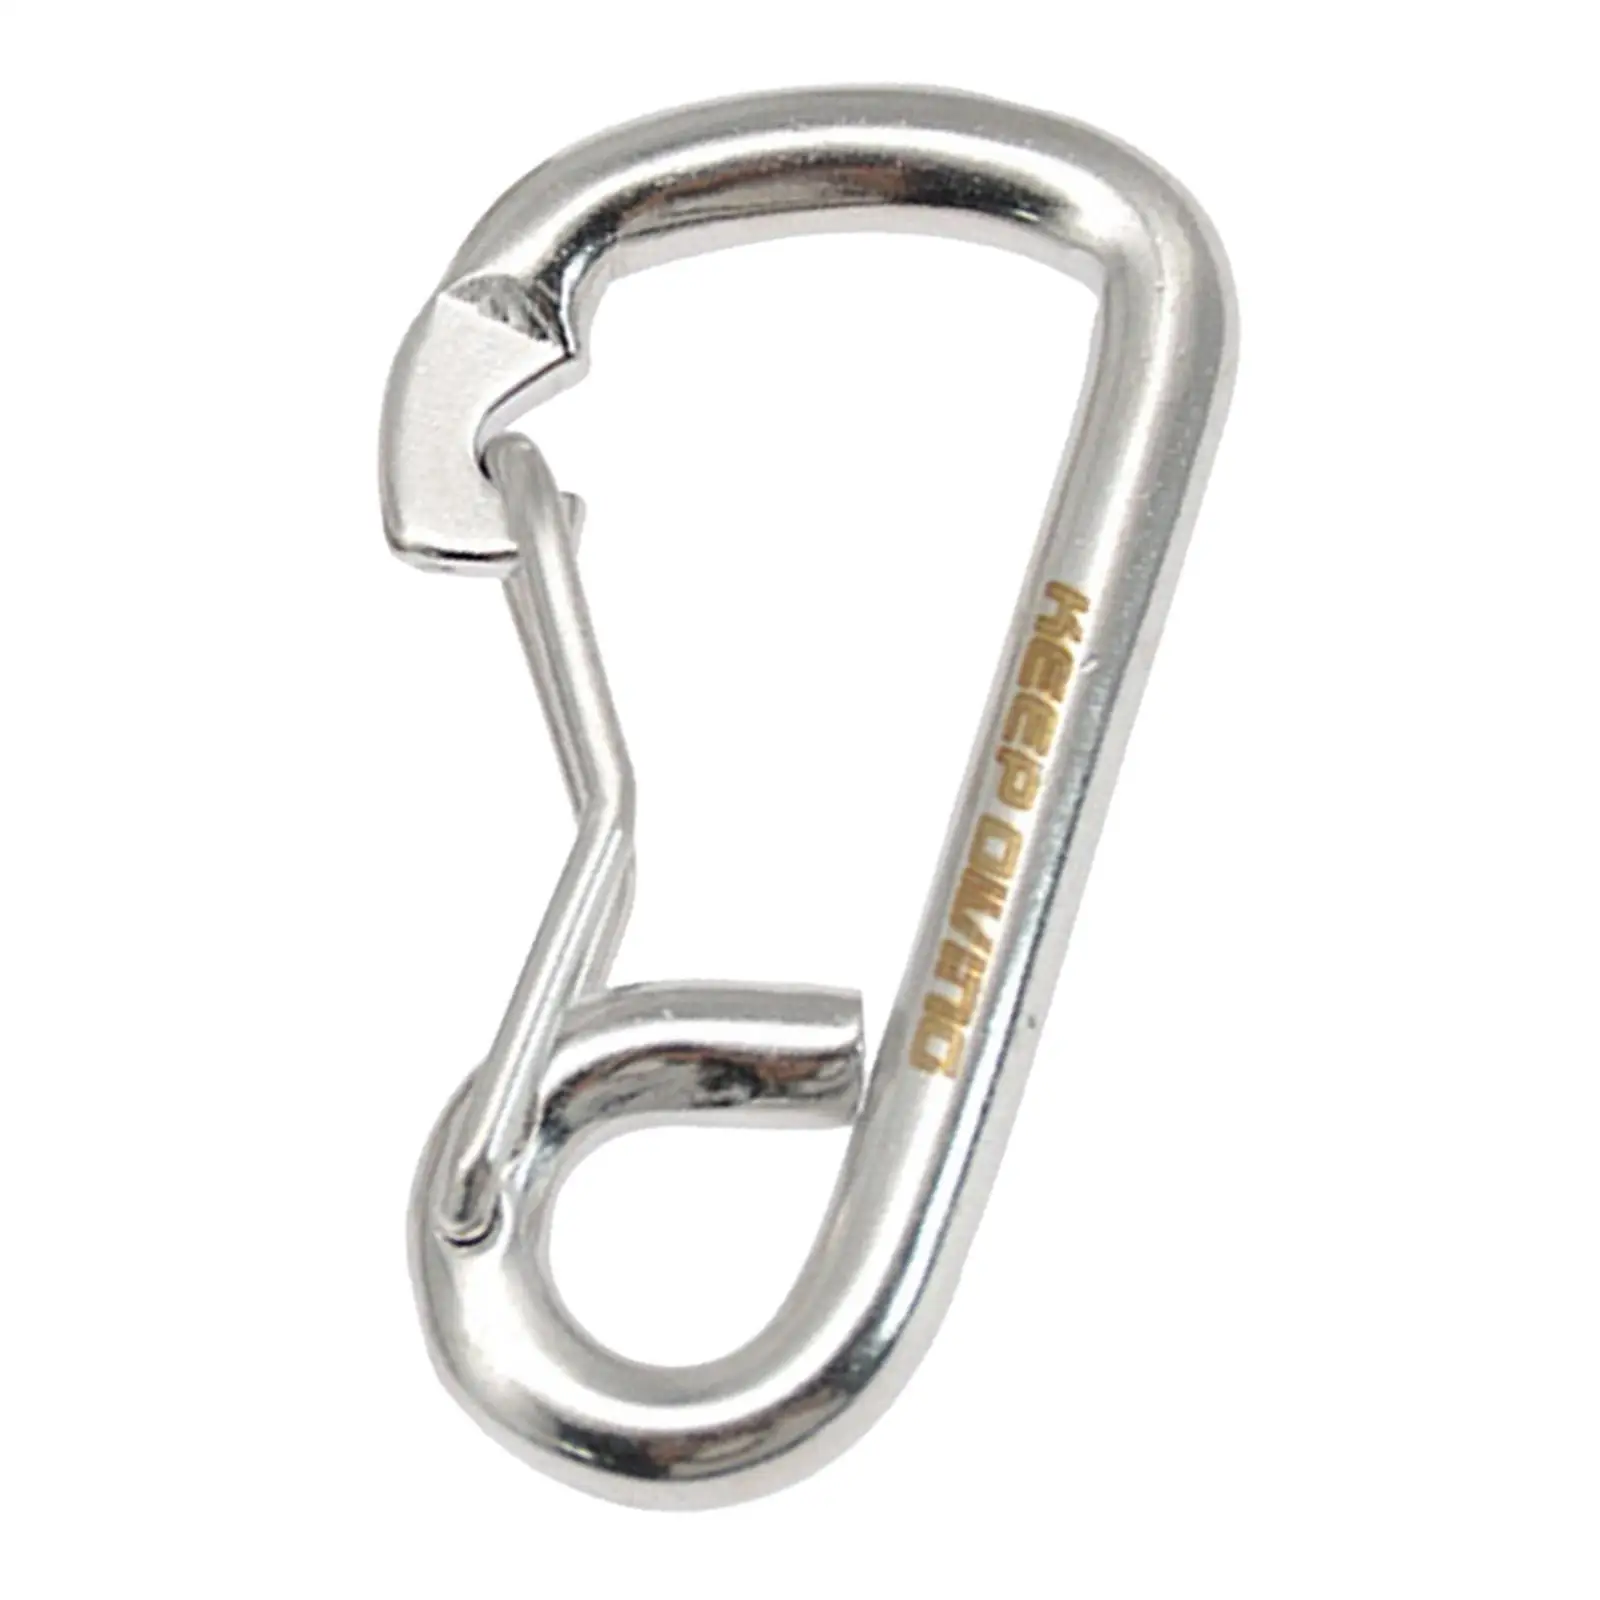 Diving Snap Hooks Scuba Diving Buckle Carabiner Quick Link Spring Hooks Key Snap Clip for Cable Weight Belt Ropes Camping